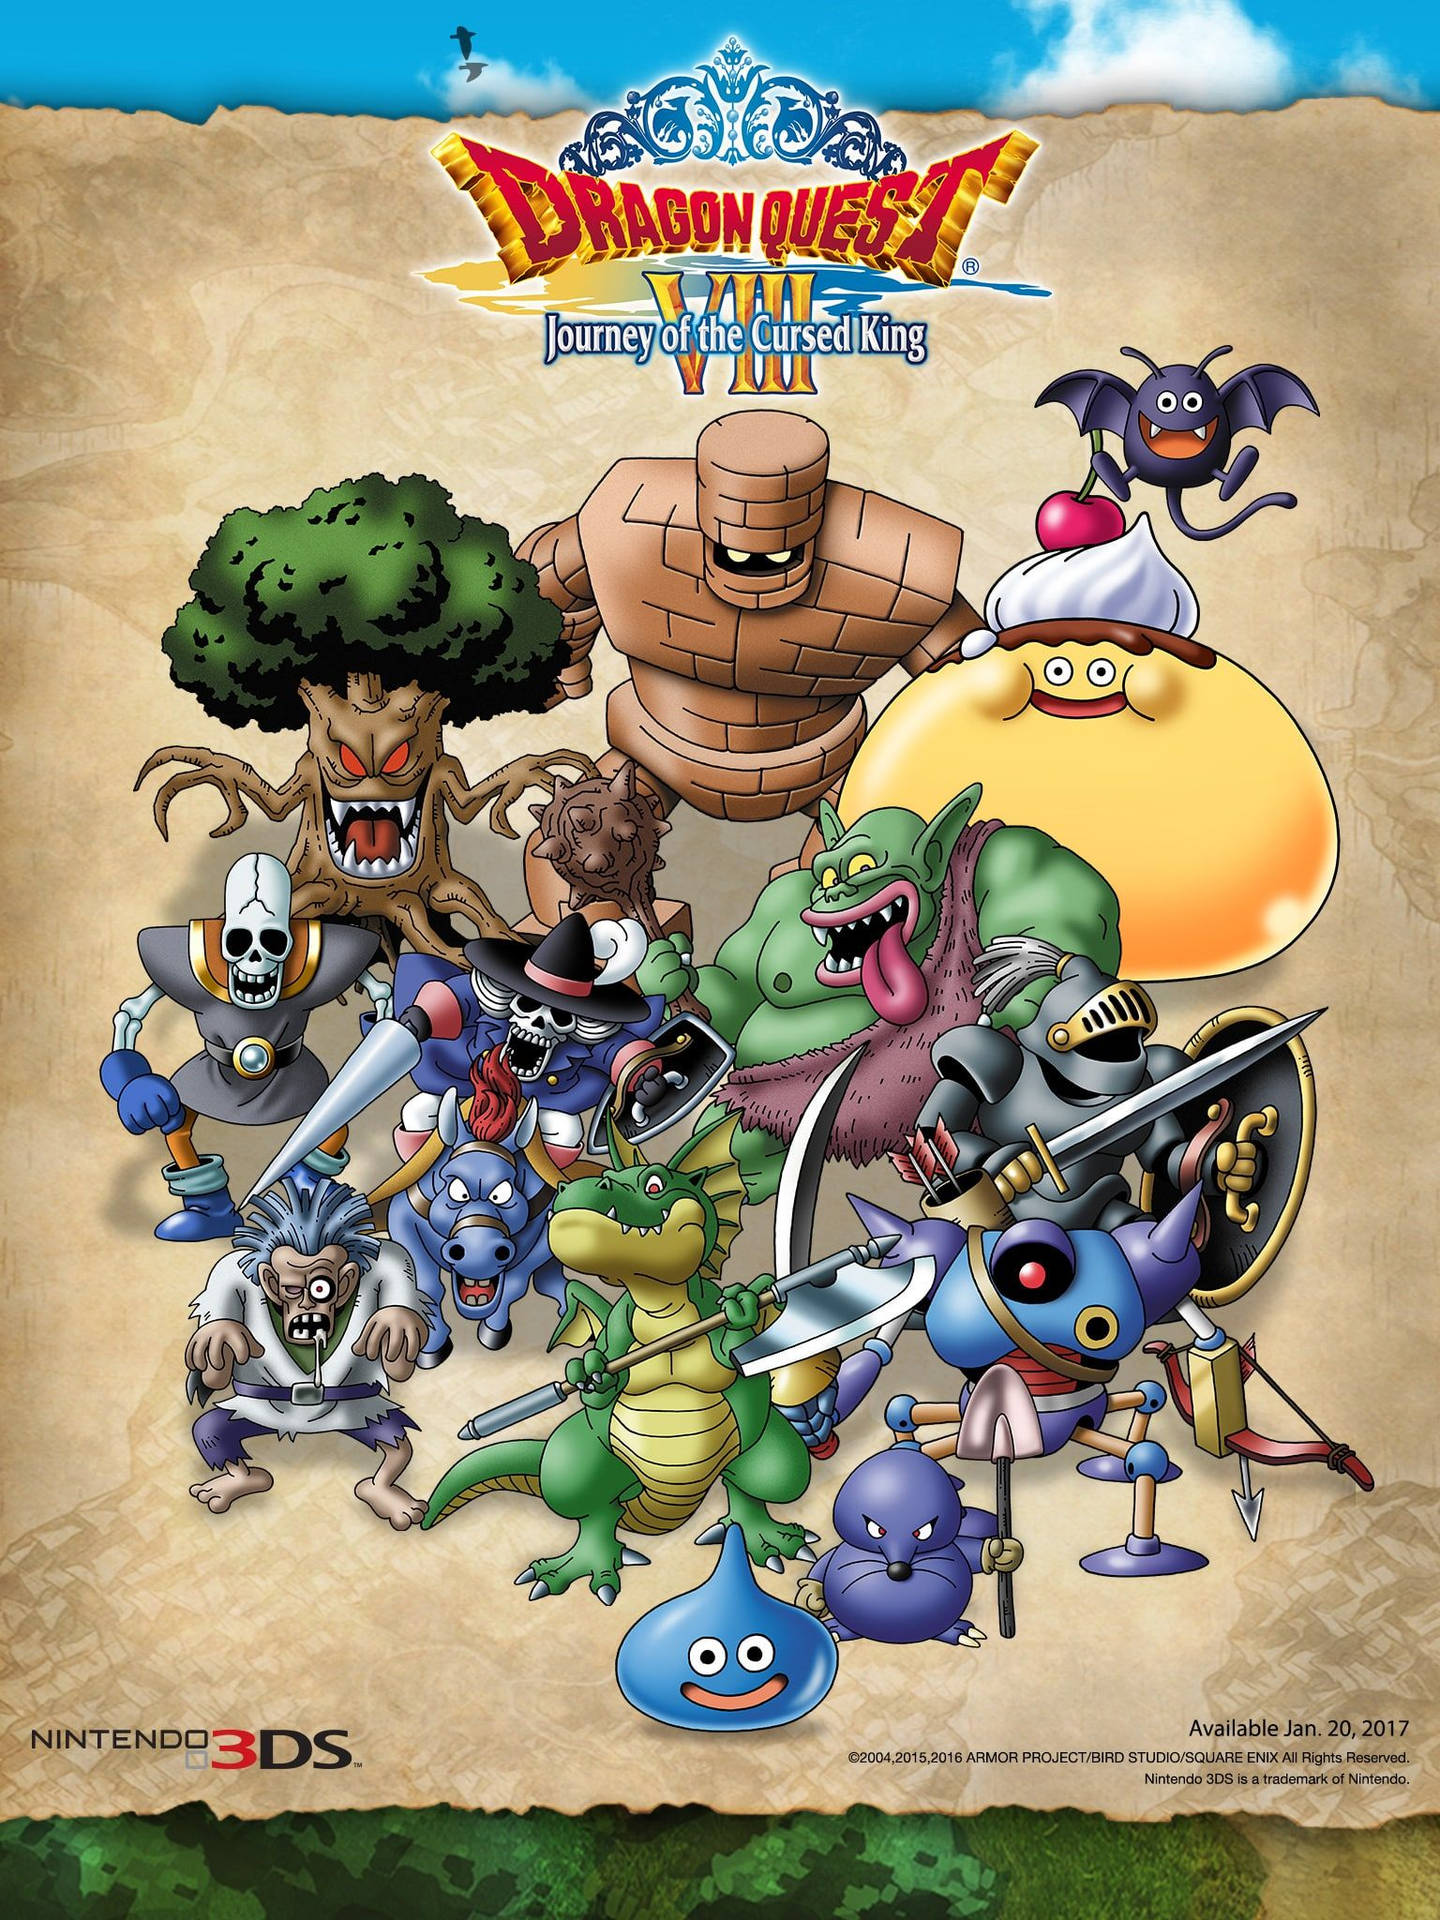 Enjoy the world of Dragon Quest in your Iphone. Wallpaper